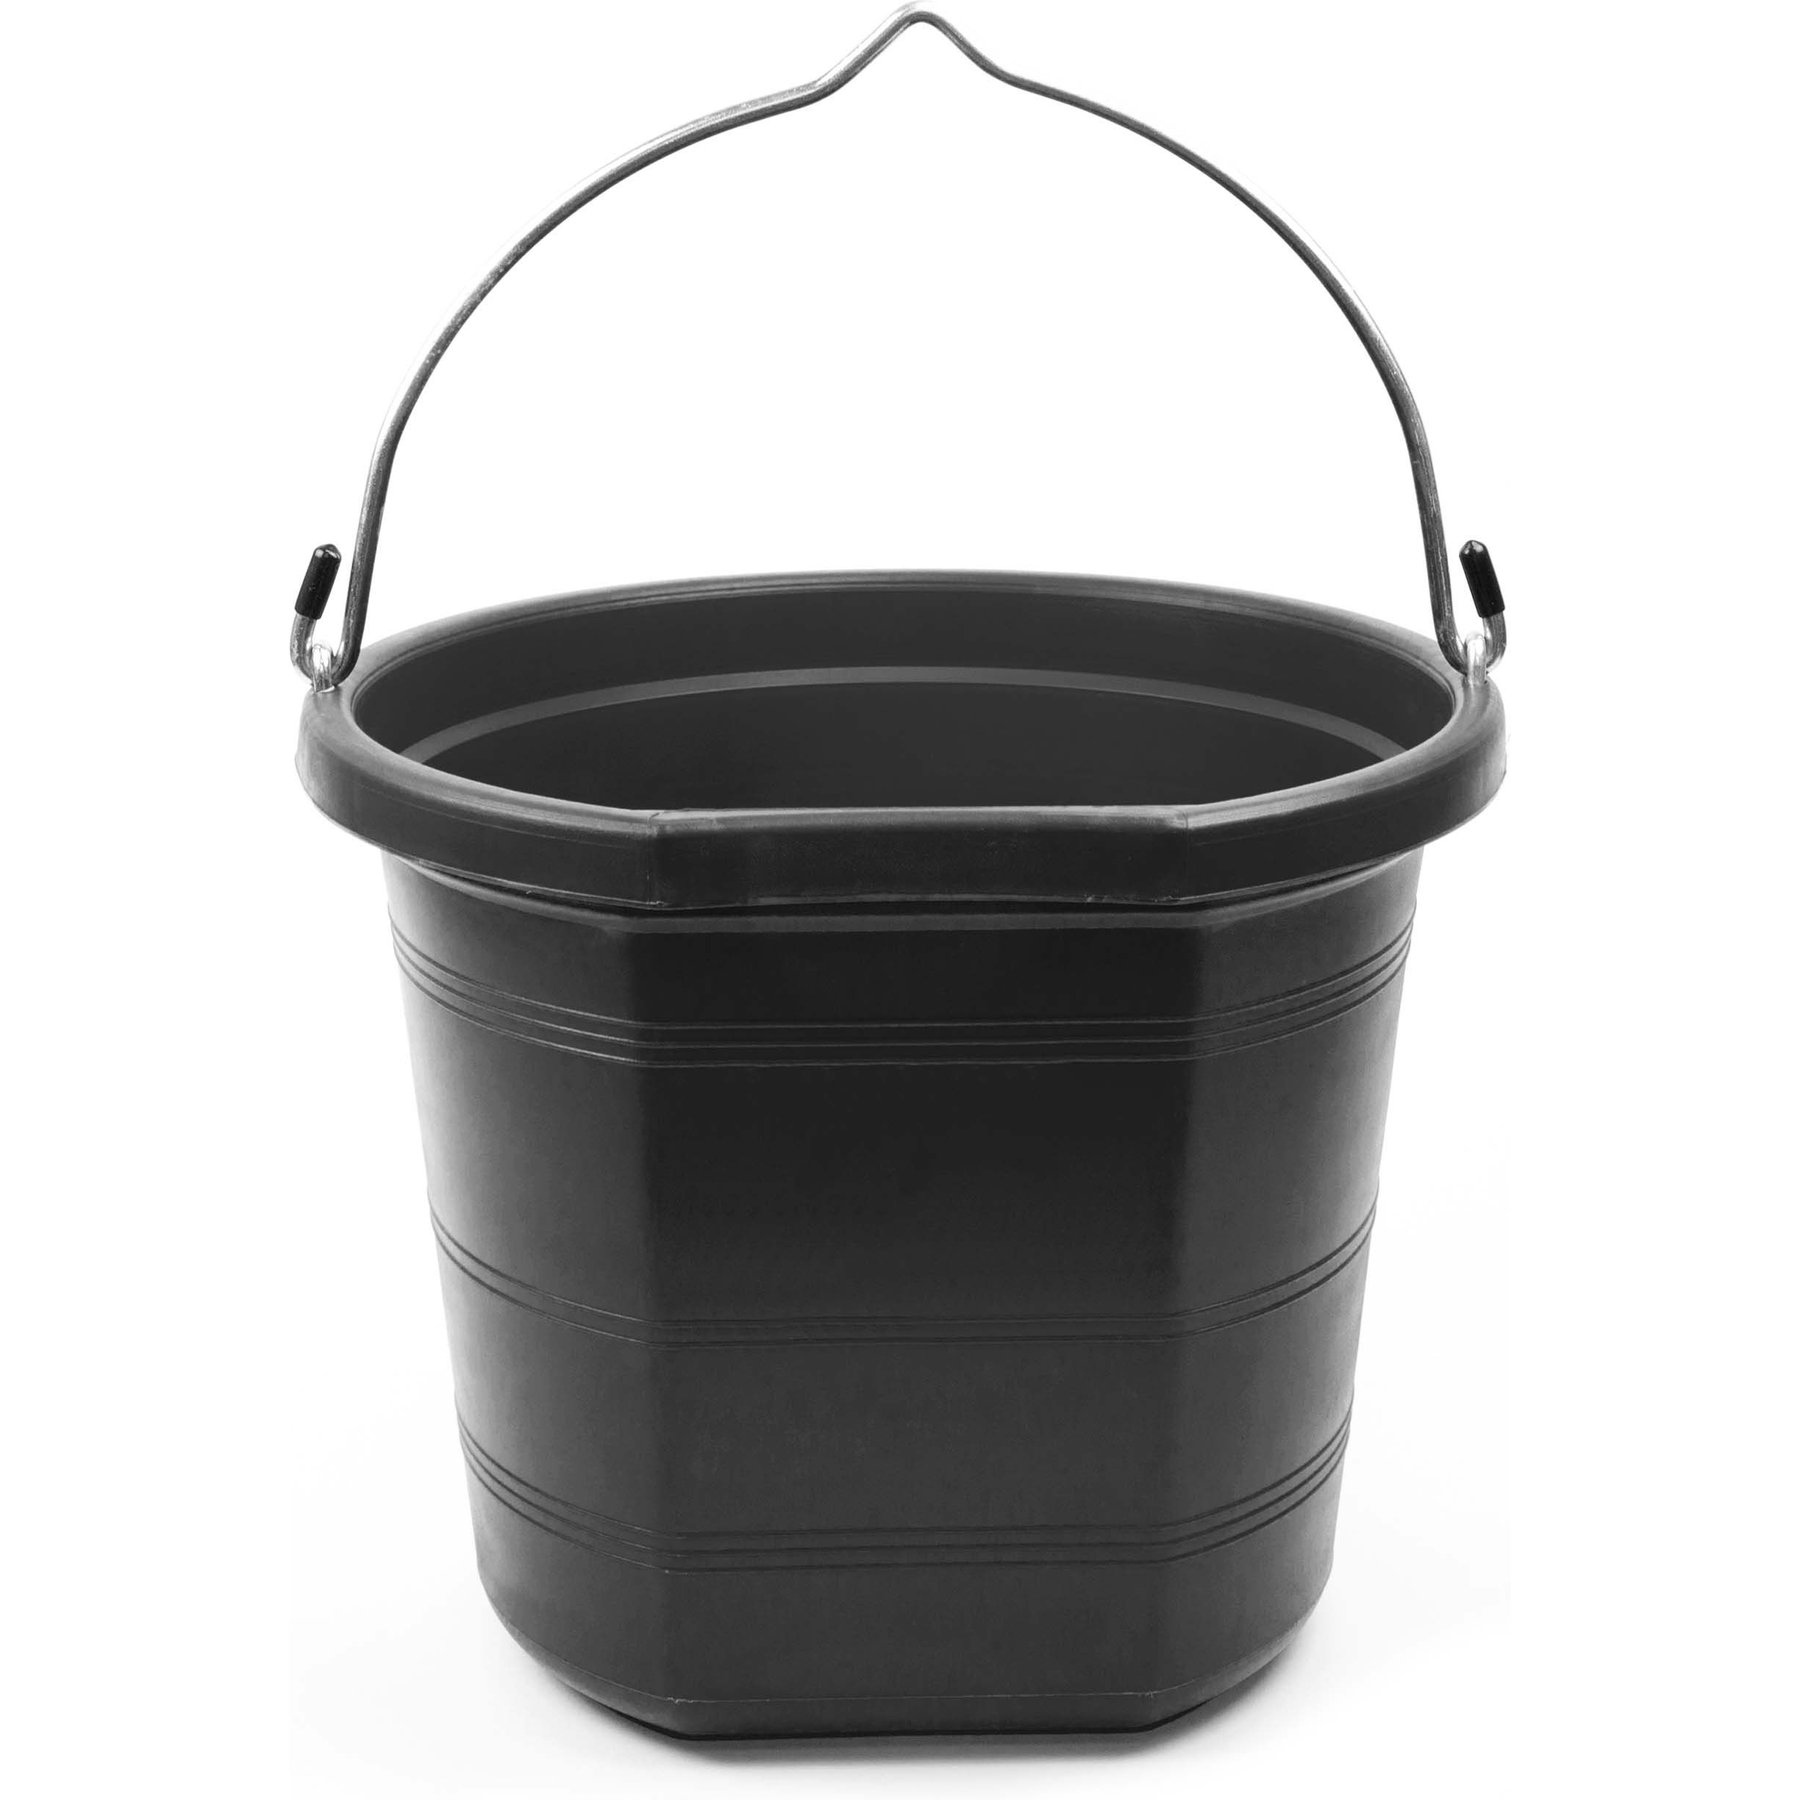 Tuff Stuff 17 gal. Feed and Seed Storage with Locking Lid at Tractor Supply  Co.